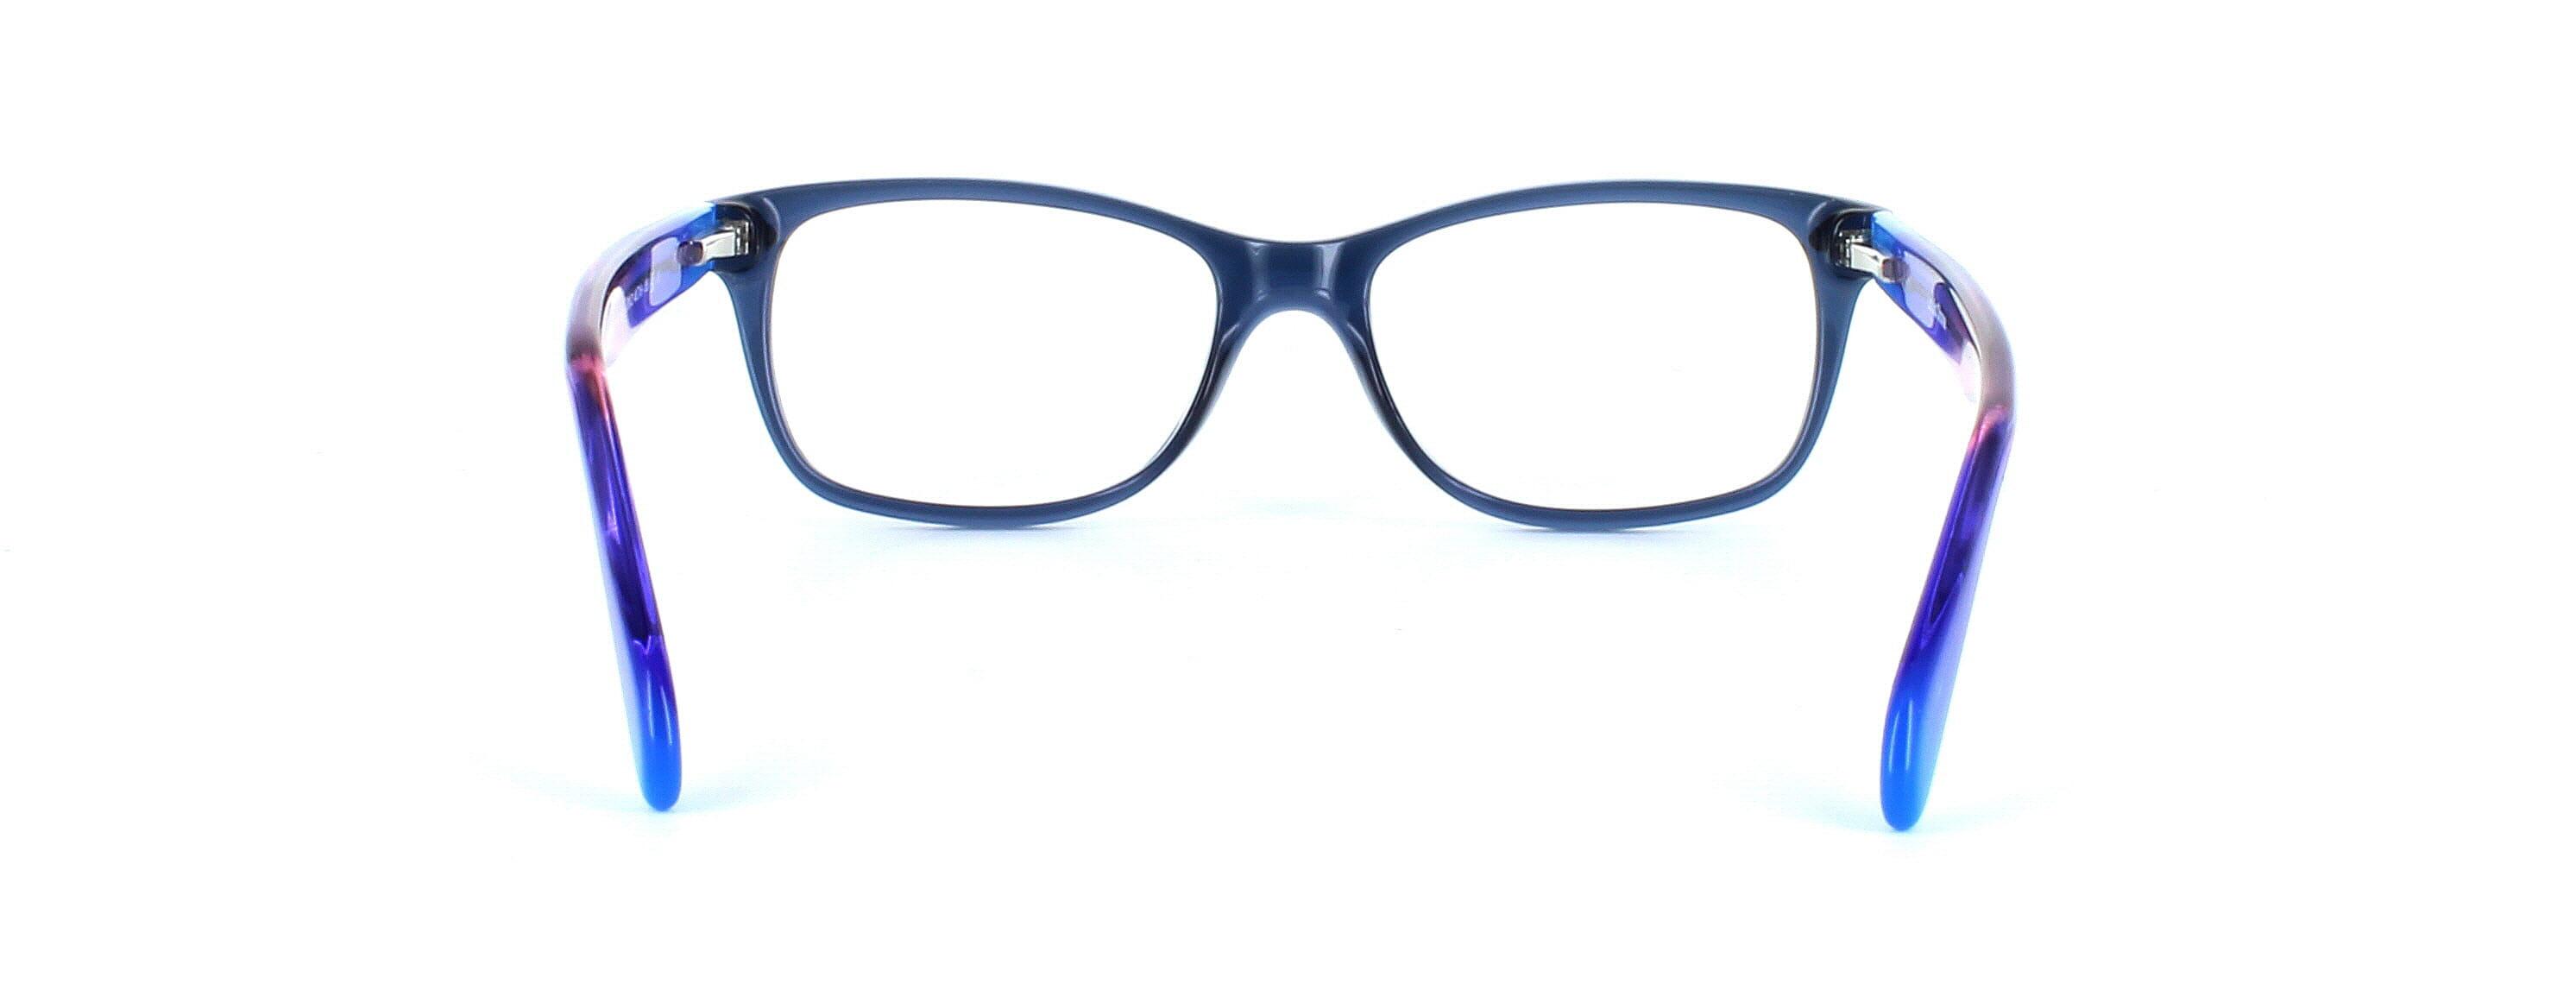 Liguria - Blue - Women's petite acetate glasses frame in blue with multi-coloured arms - image view 4